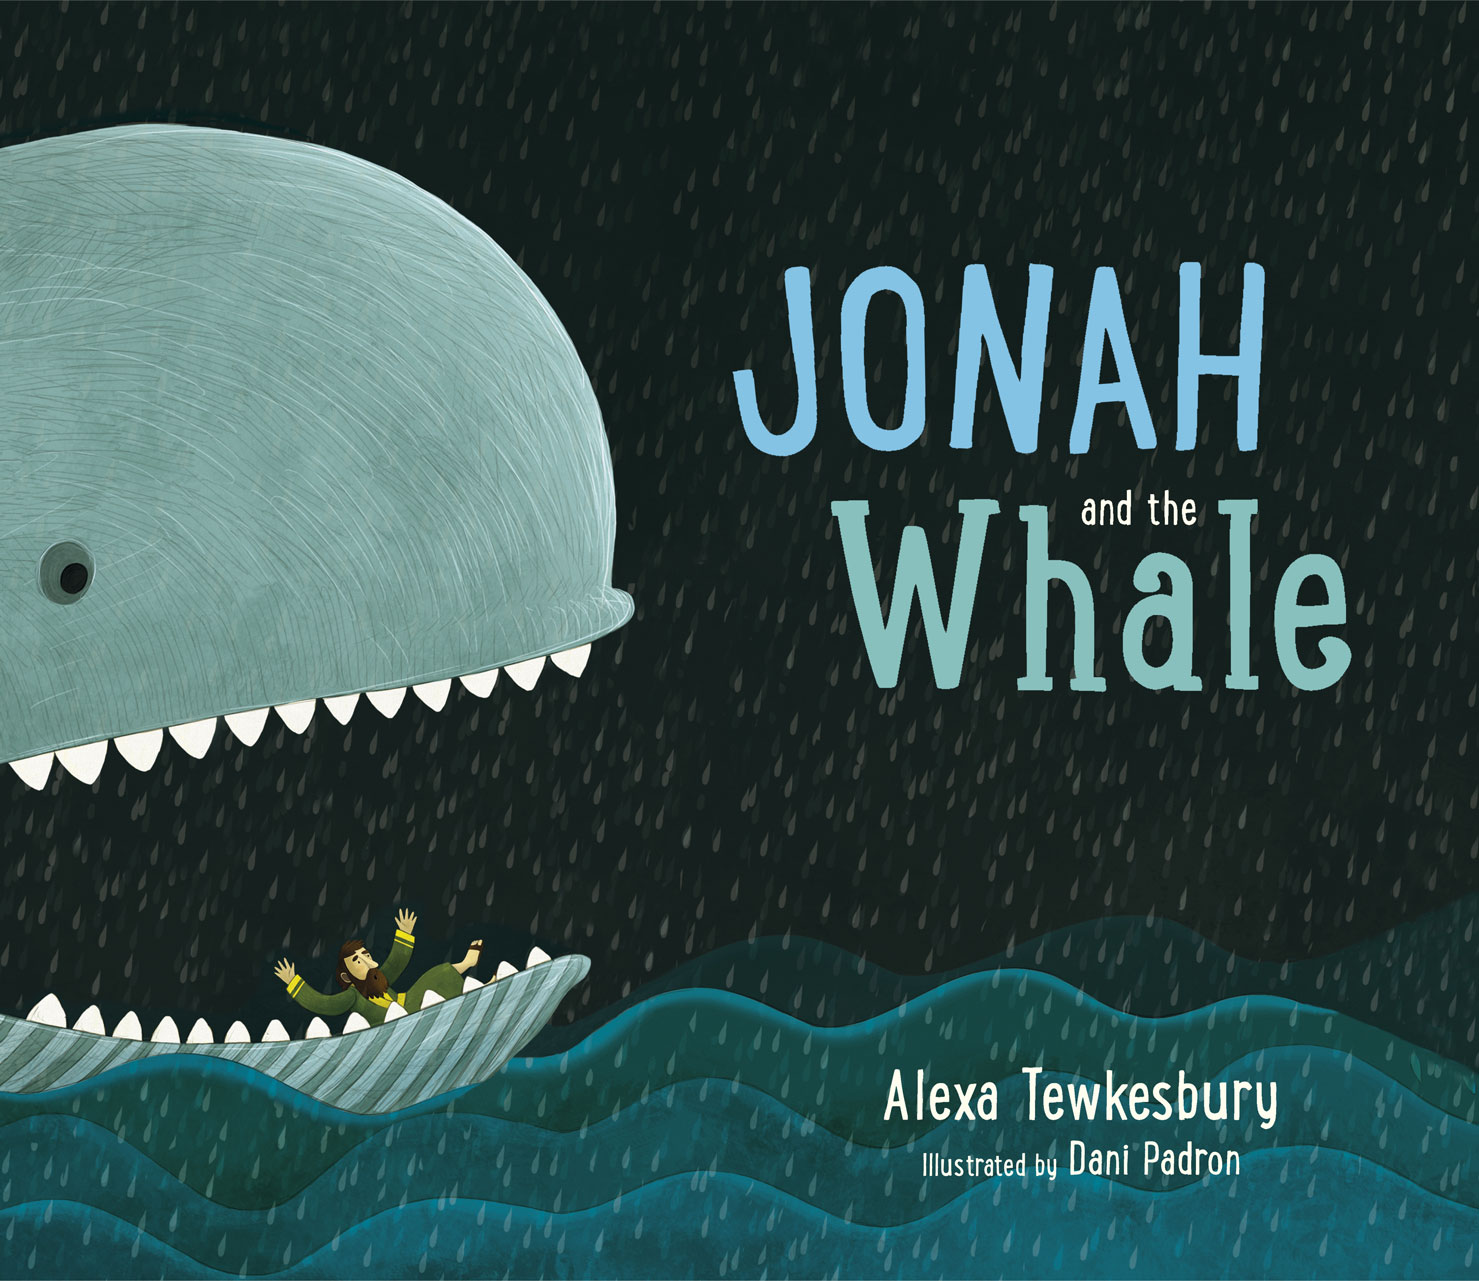 Cast of jonah and the pink whale